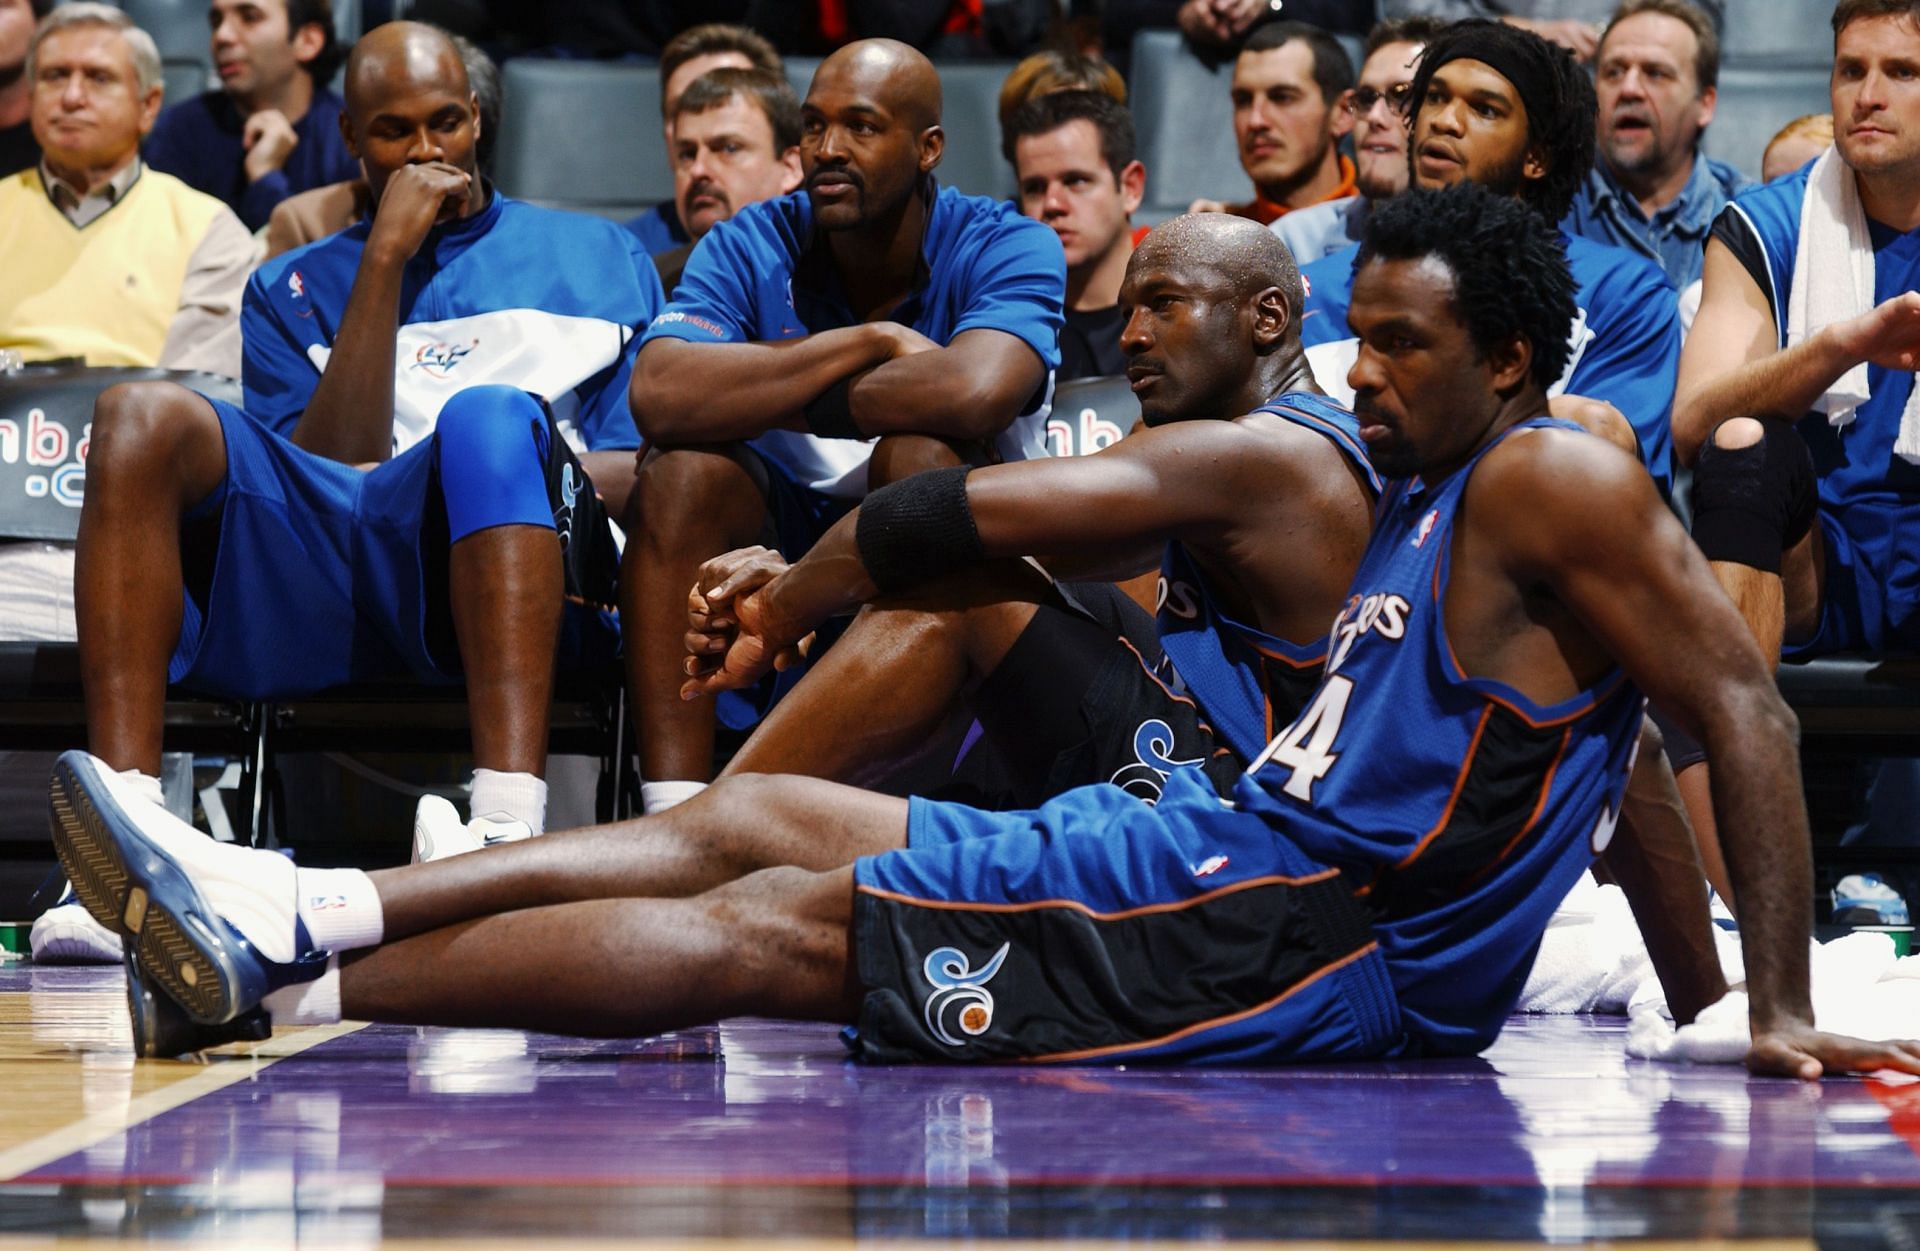 Michael Jordan and Charles Oakley, foreground, sit on the sideline.